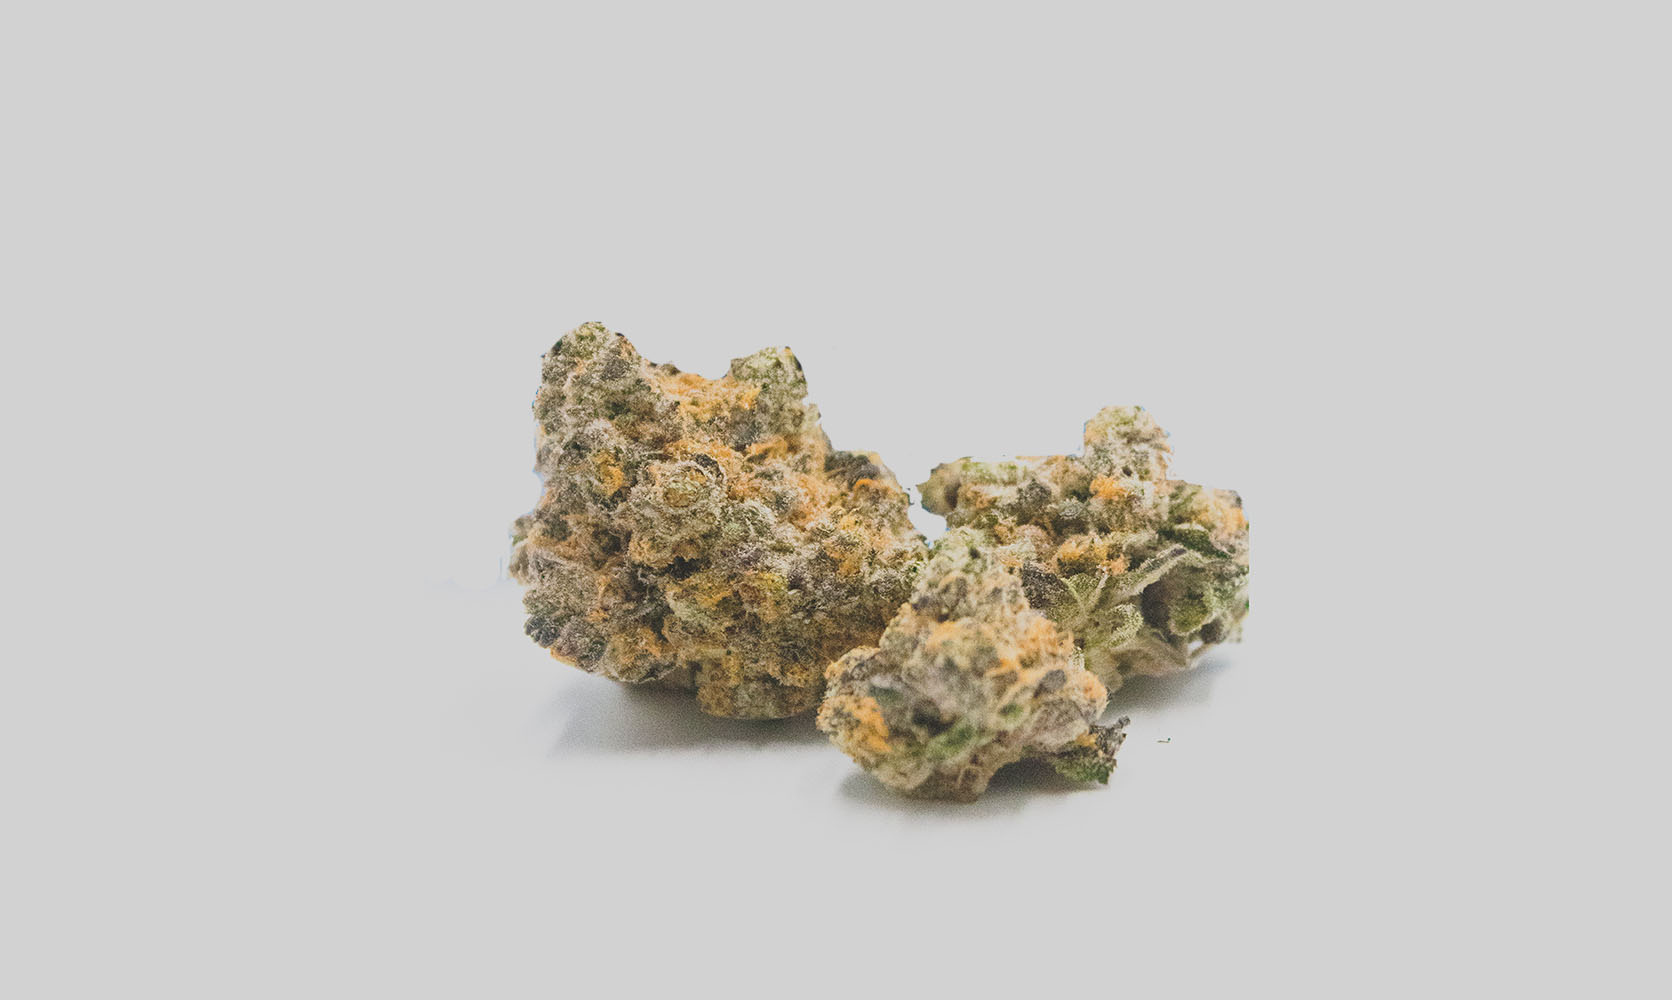 Purple Drank Breath strain value buds from cheapweed dispensary for BC cannabis. Buy weed online Canada.